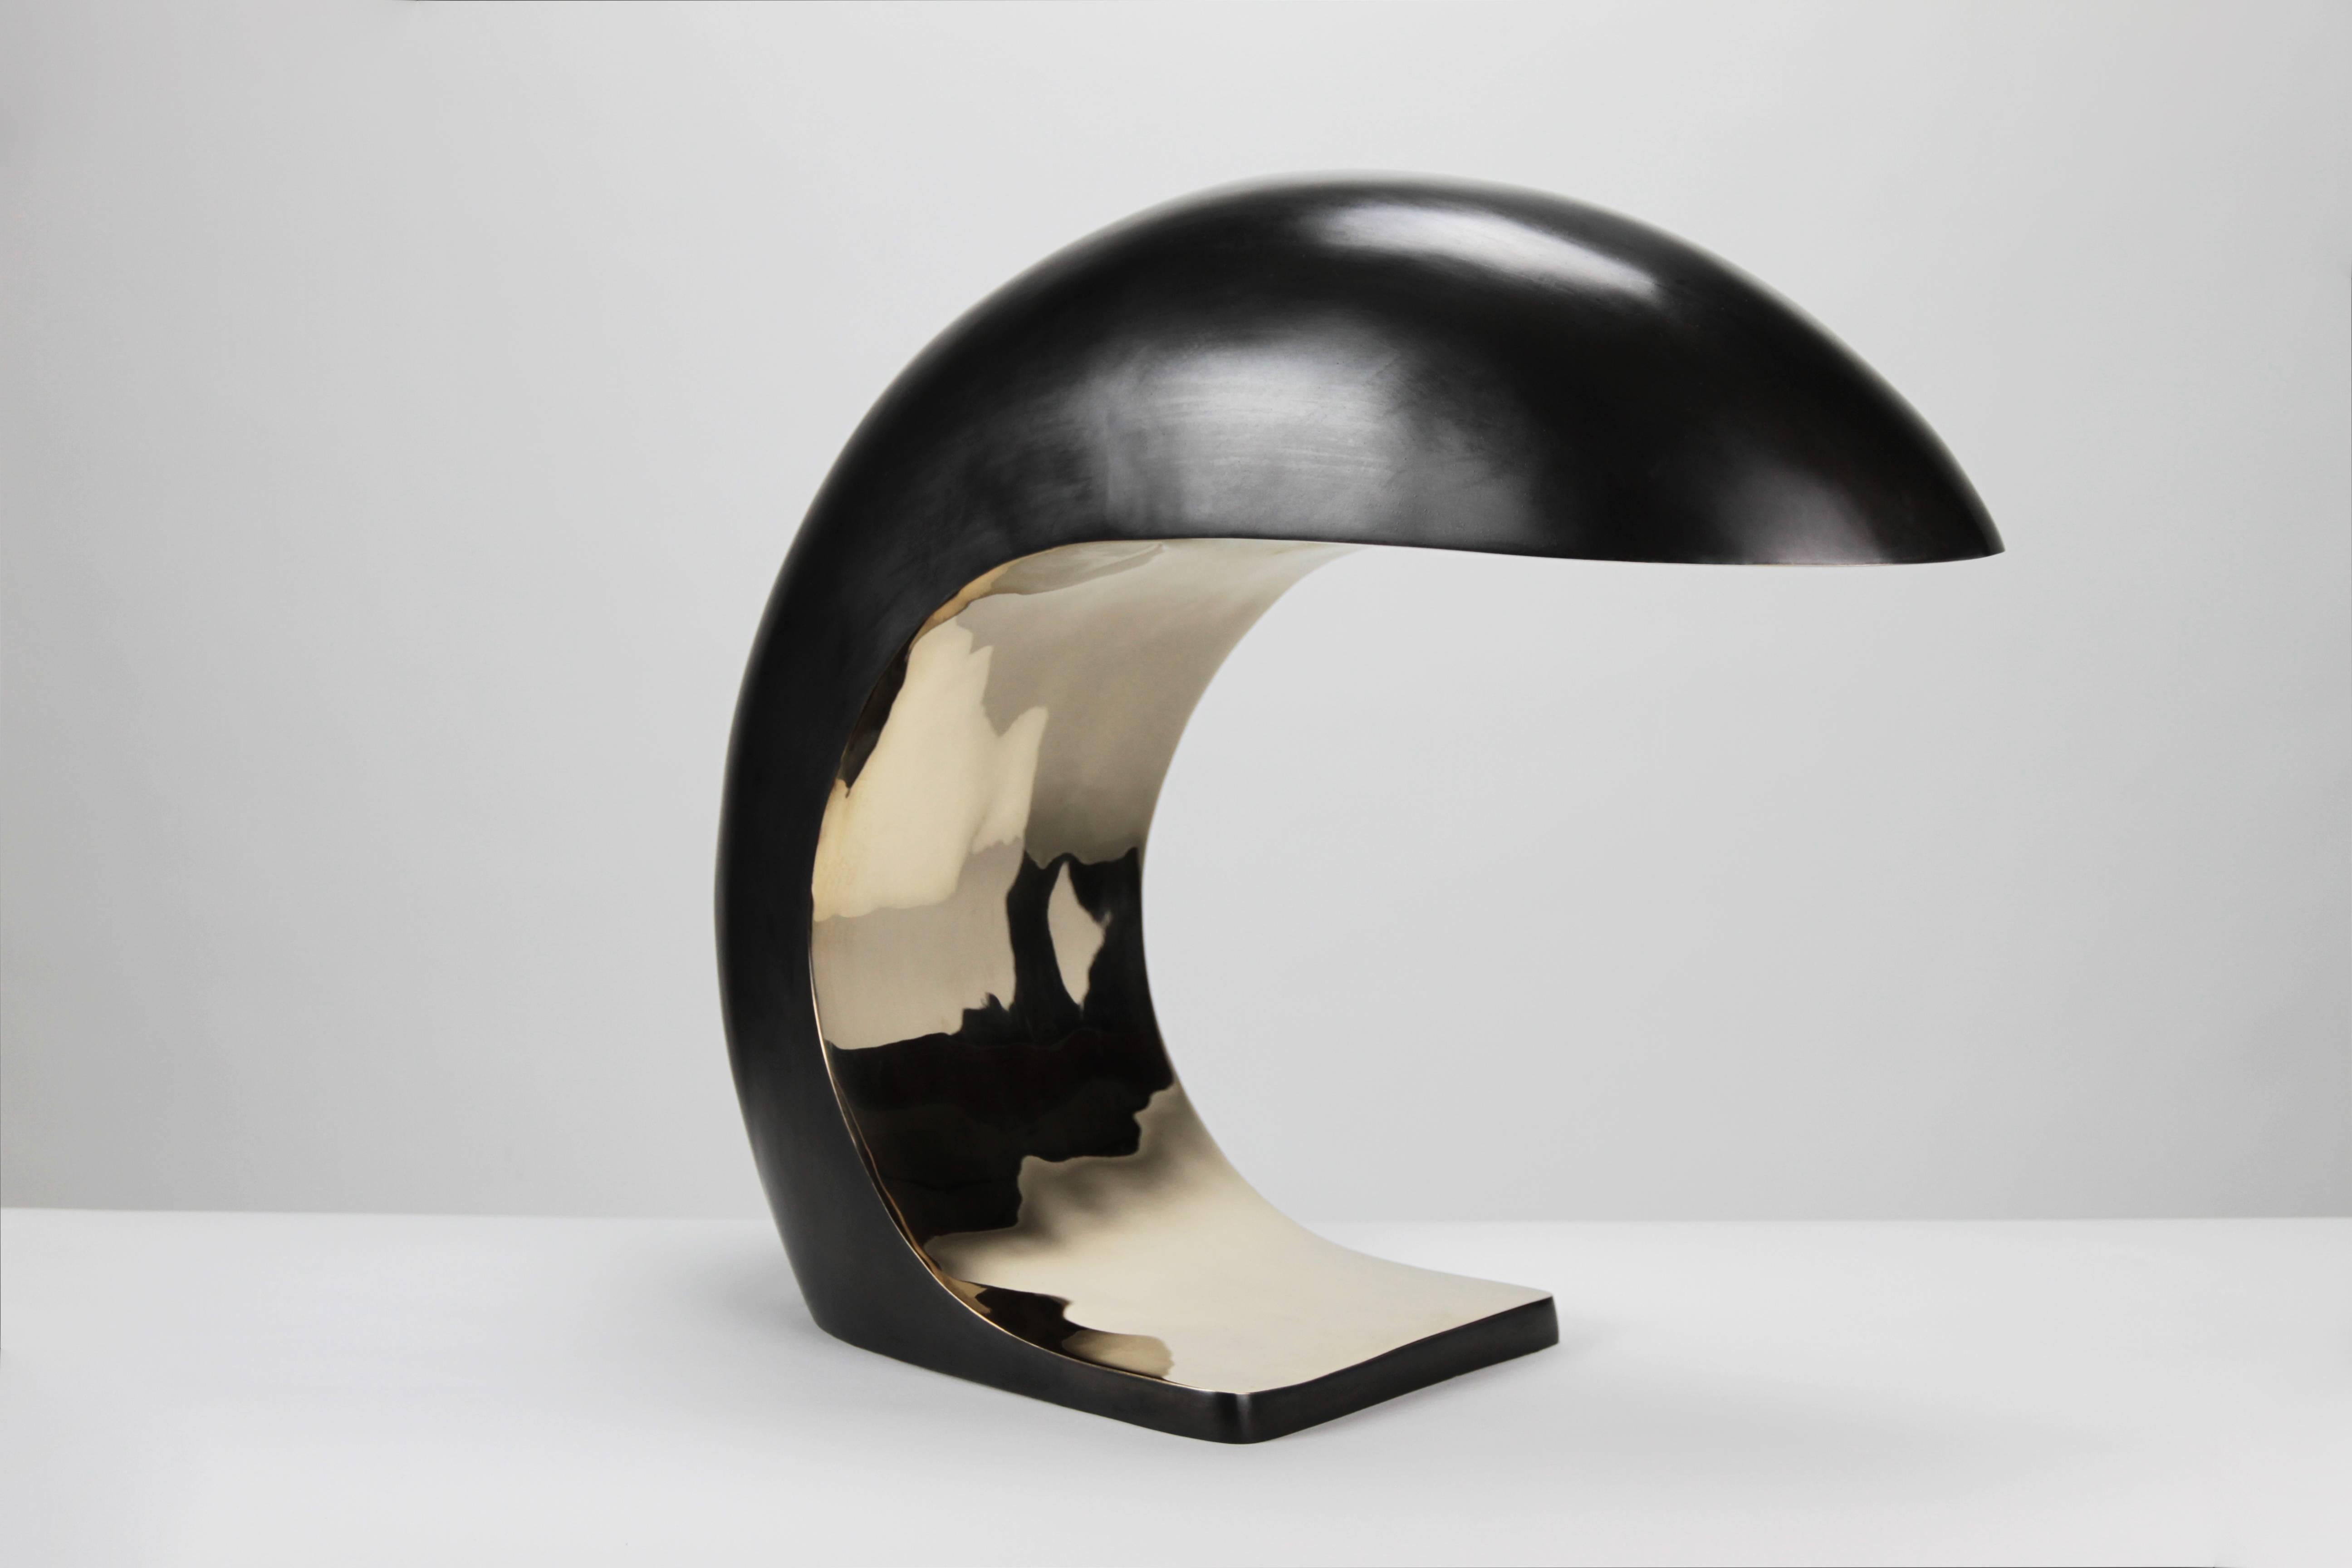 (Imperfect model - some texture and discoloration on the high polished area. see photos.

The NAUTILUS lamp is inspired by midcentury Italian design.
It is cast bronze and weighs up to 28 pounds. The outer shell has a blackened patina and the face